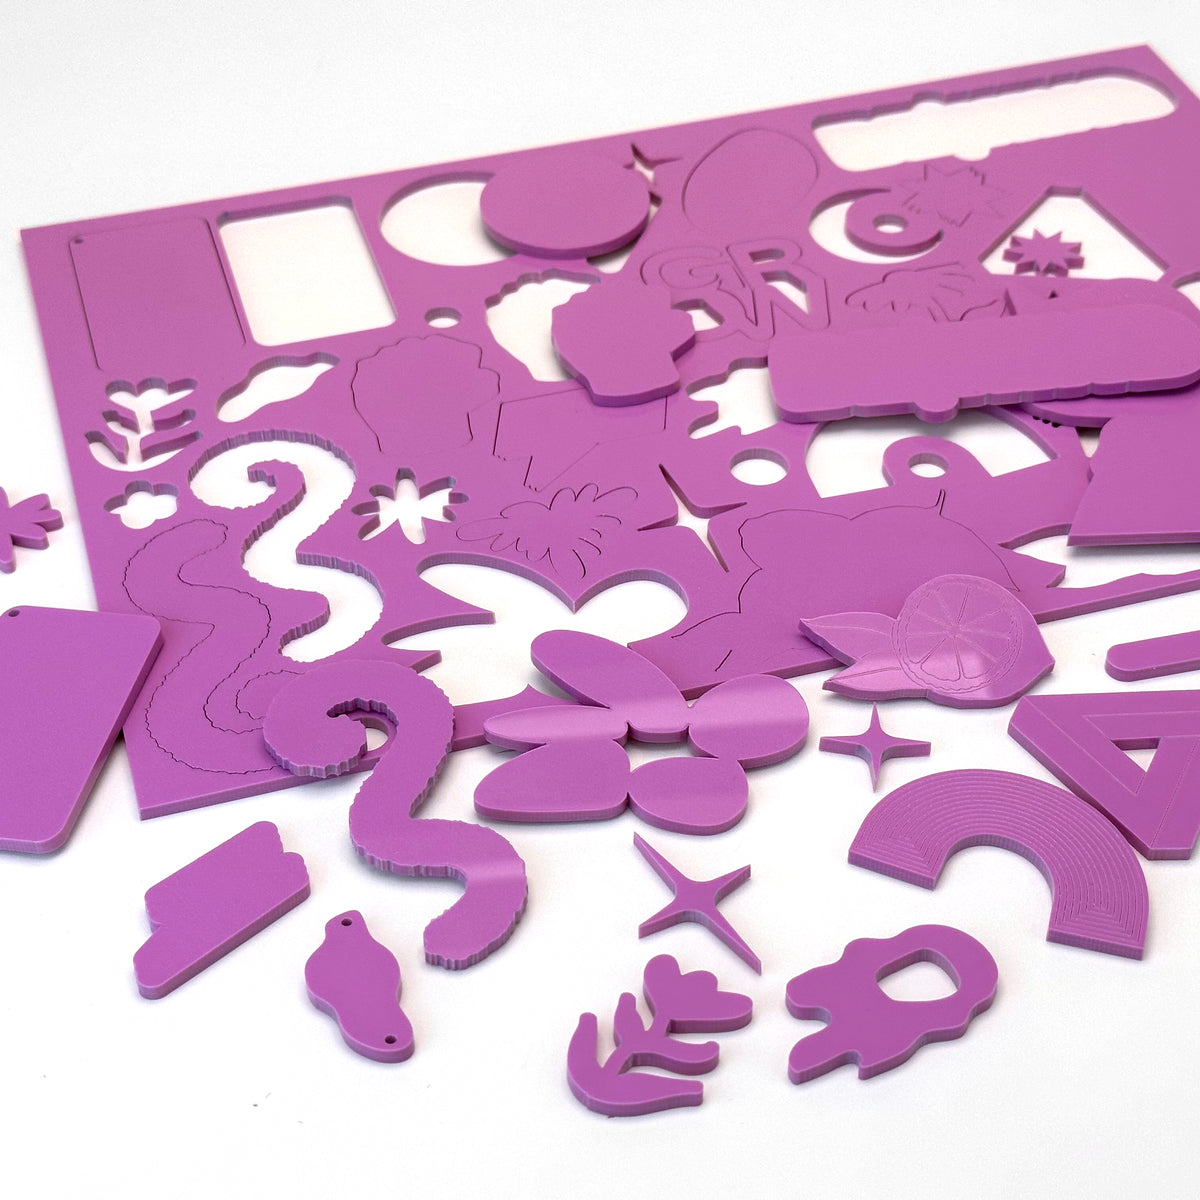 Bubble Gum Pink Acrylic with laser cutting only - 600x400mm